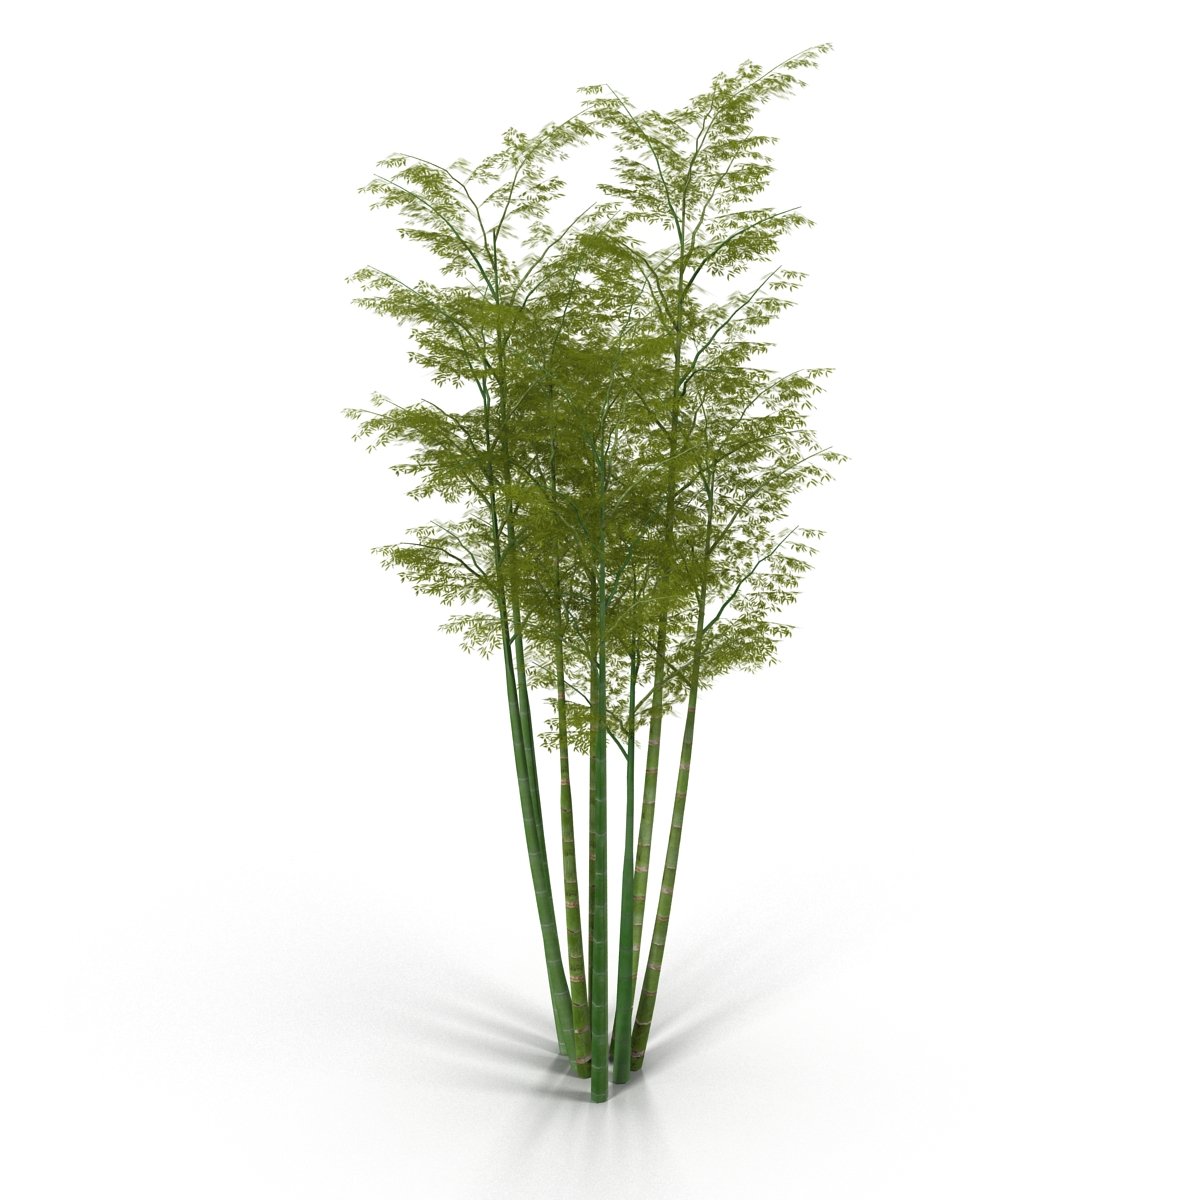 Tall bamboo tree with green leaves on a white background.